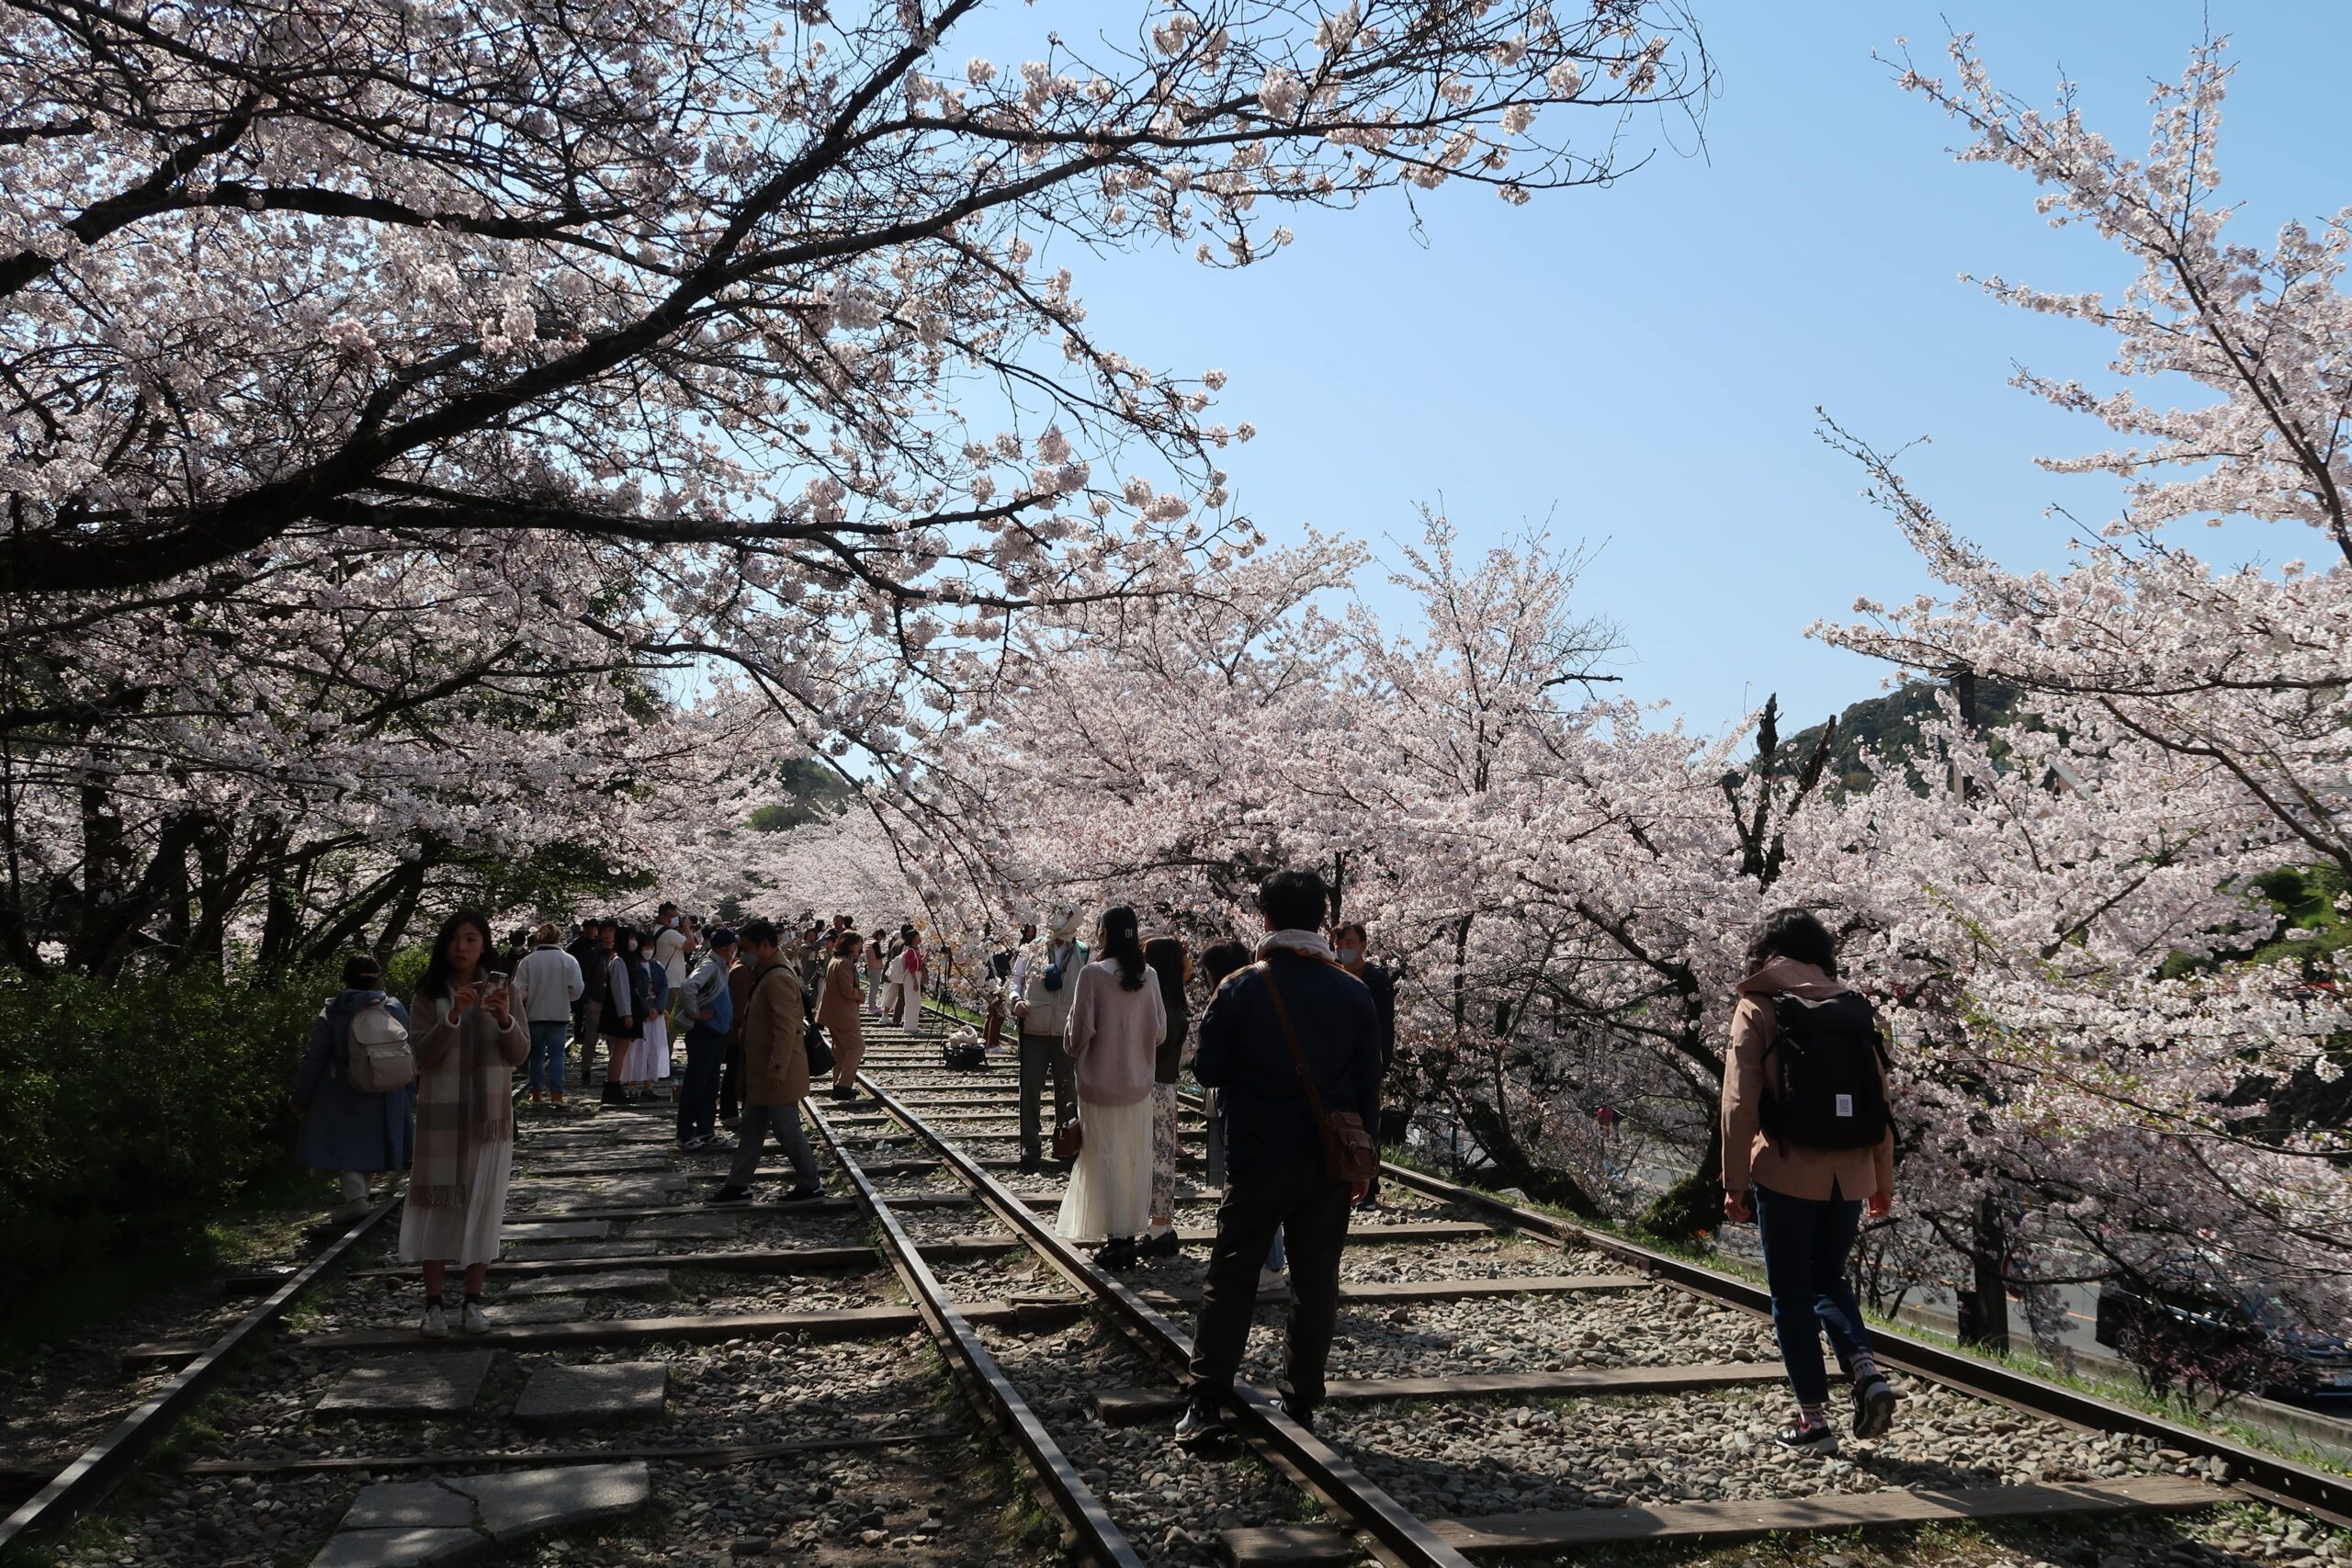 keage incline kyoto best photo spots for cherry blossoms where to find them how to photograph